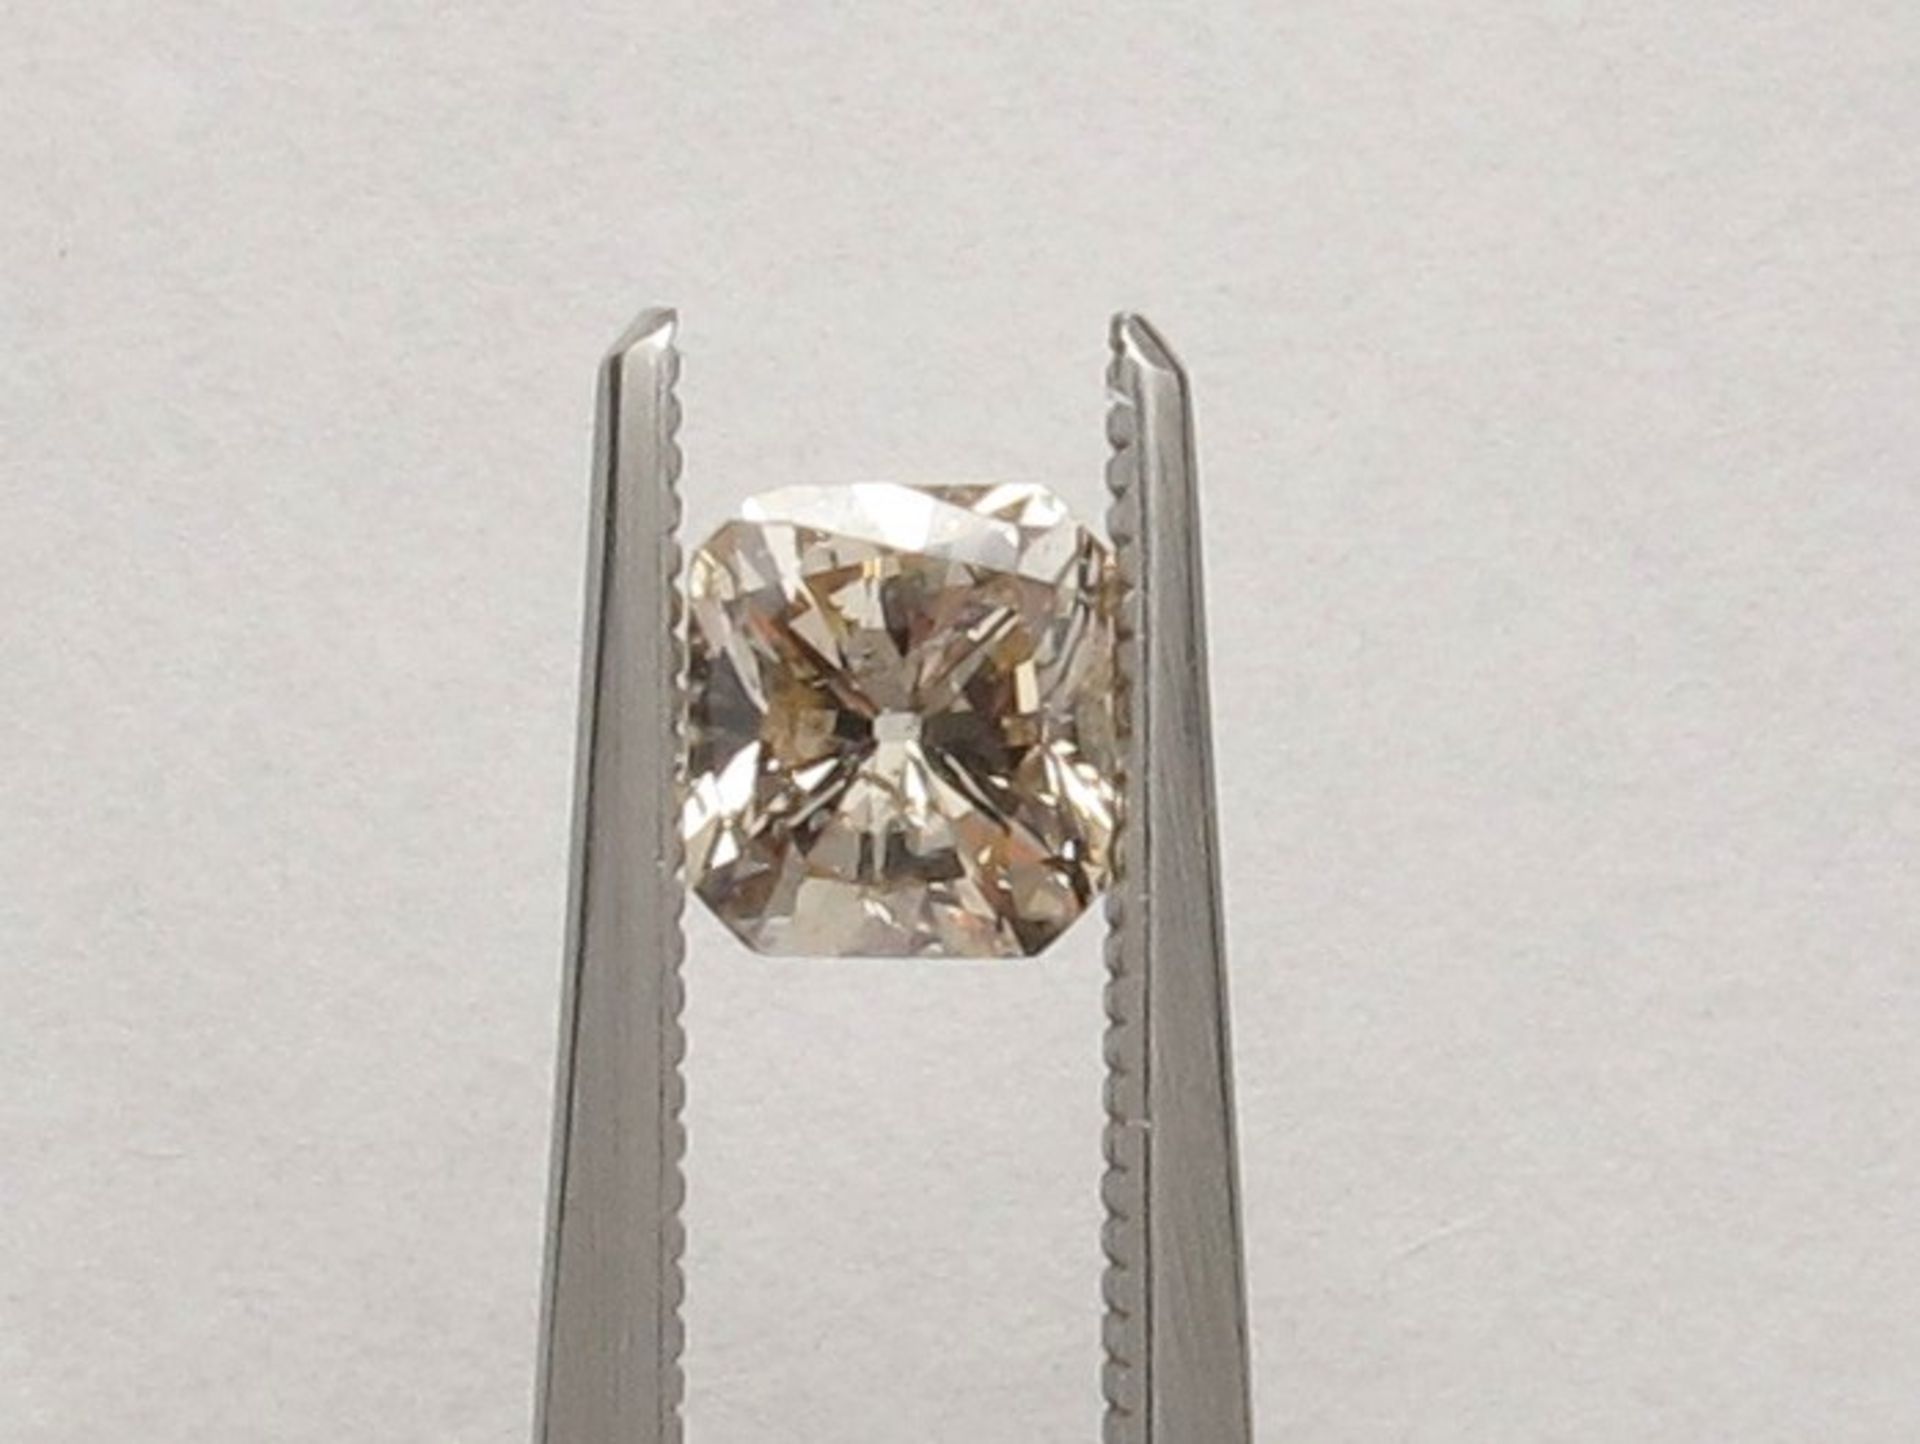 An unmounted radiant-shaped diamond weighing app. 0.92ct.